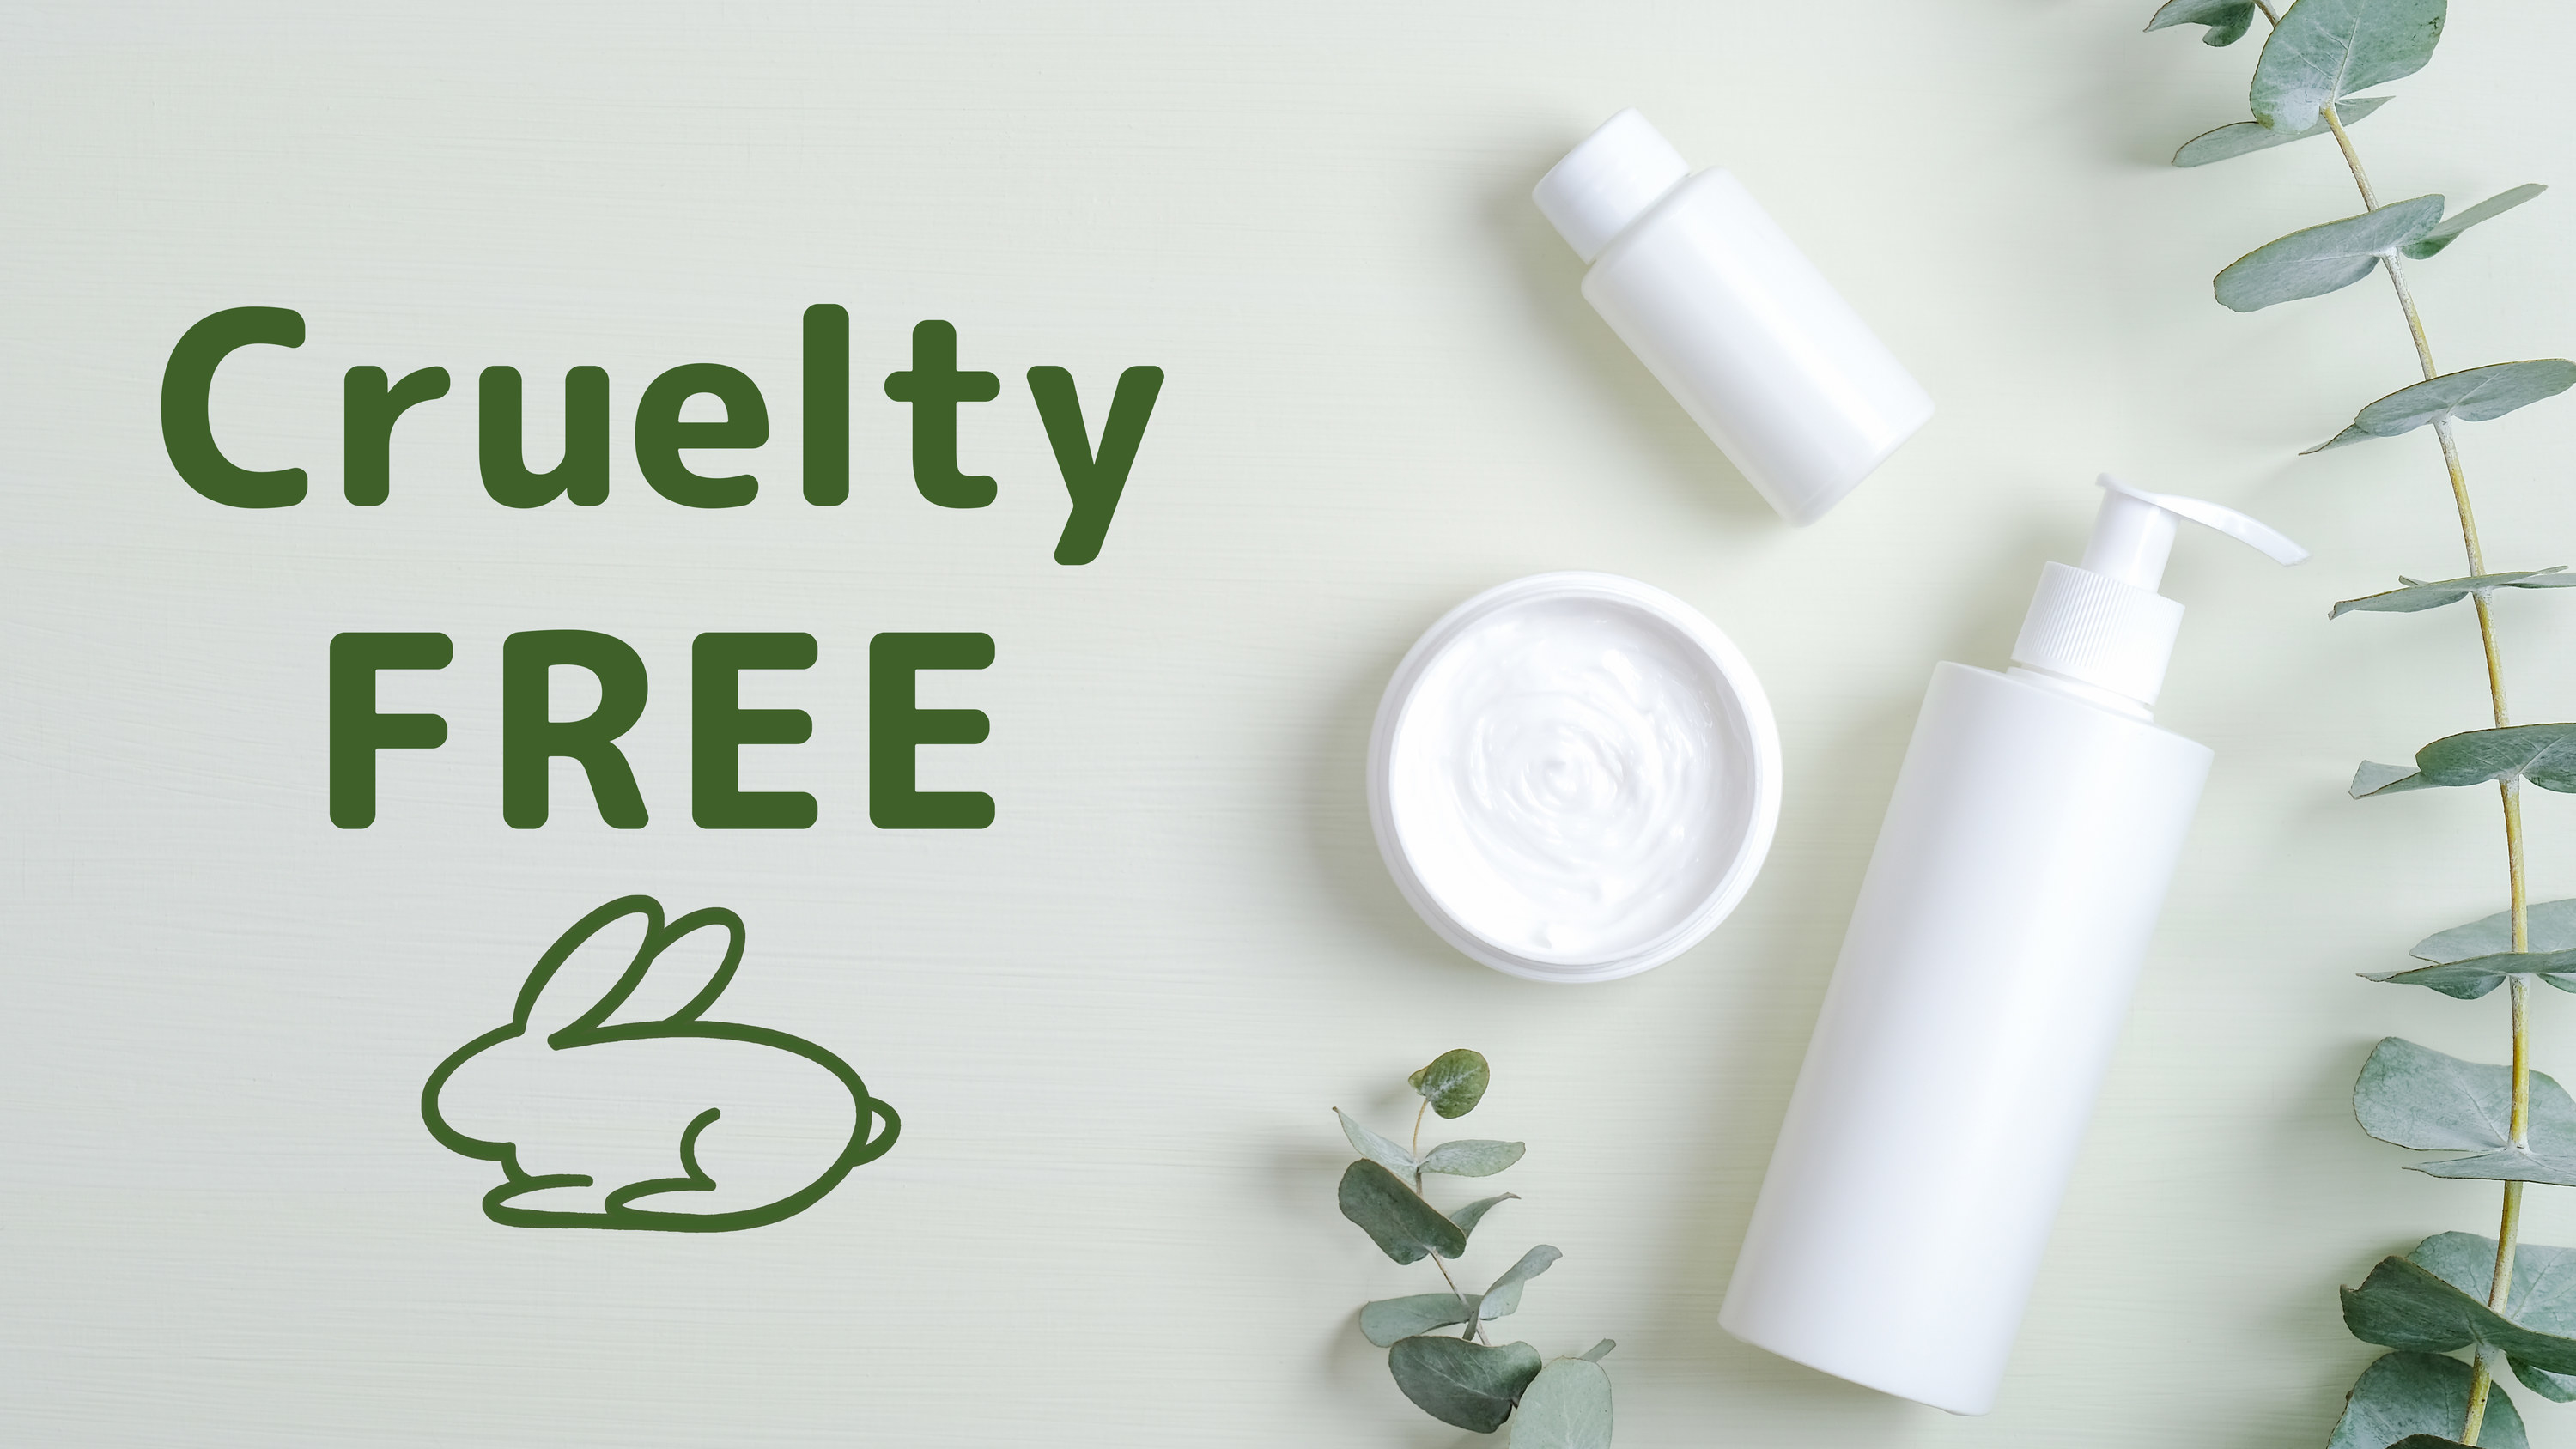 Cruelty free cosmetics on a plain background